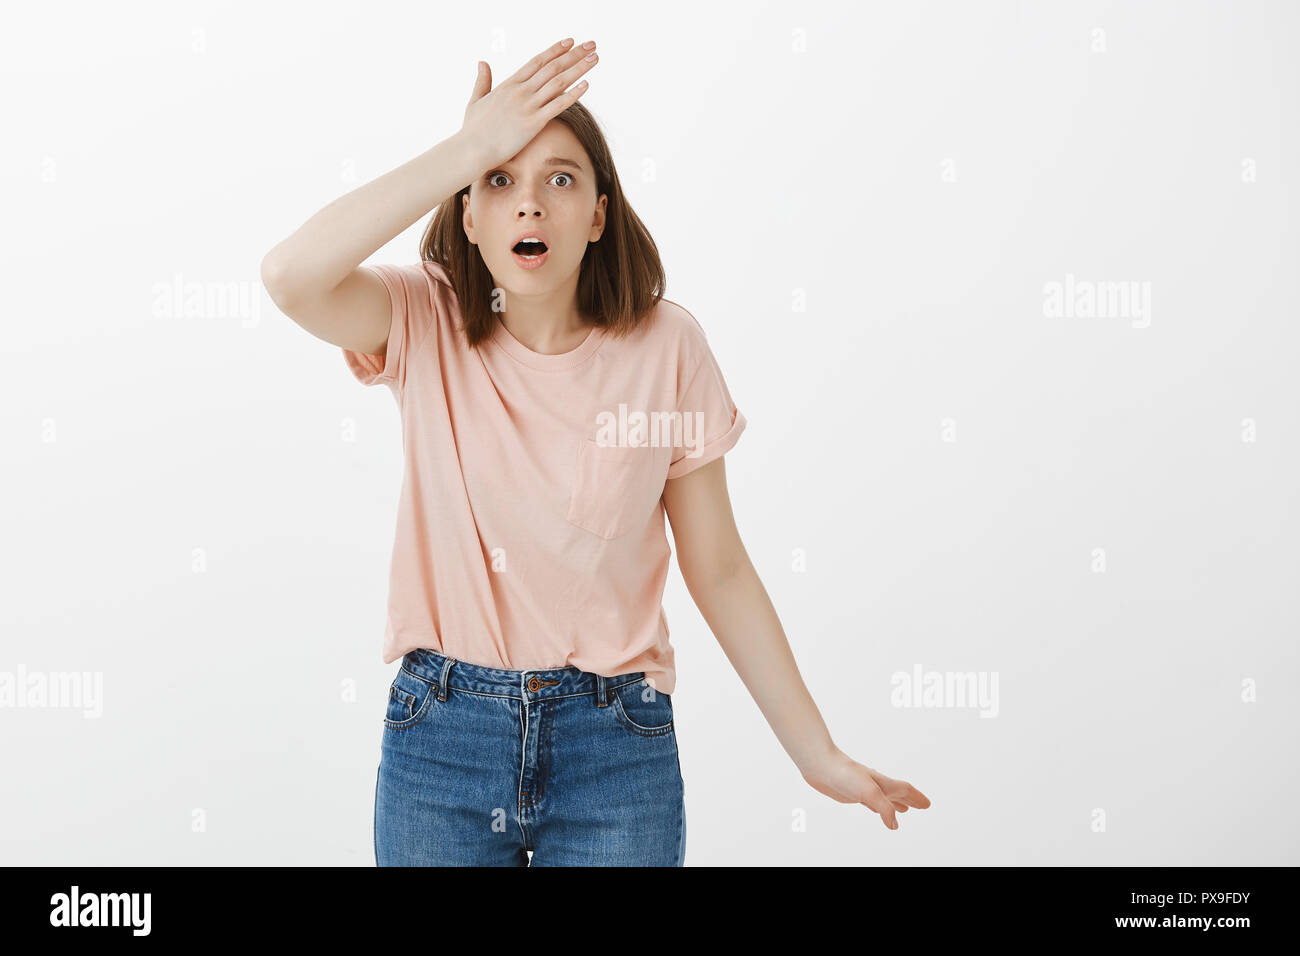 Girl remembered importrant task she forgot, punching herself in forehead, dropping jaw and standing anxious over gray background, gesturing, being forgetful and intense, recalling something Stock Photo